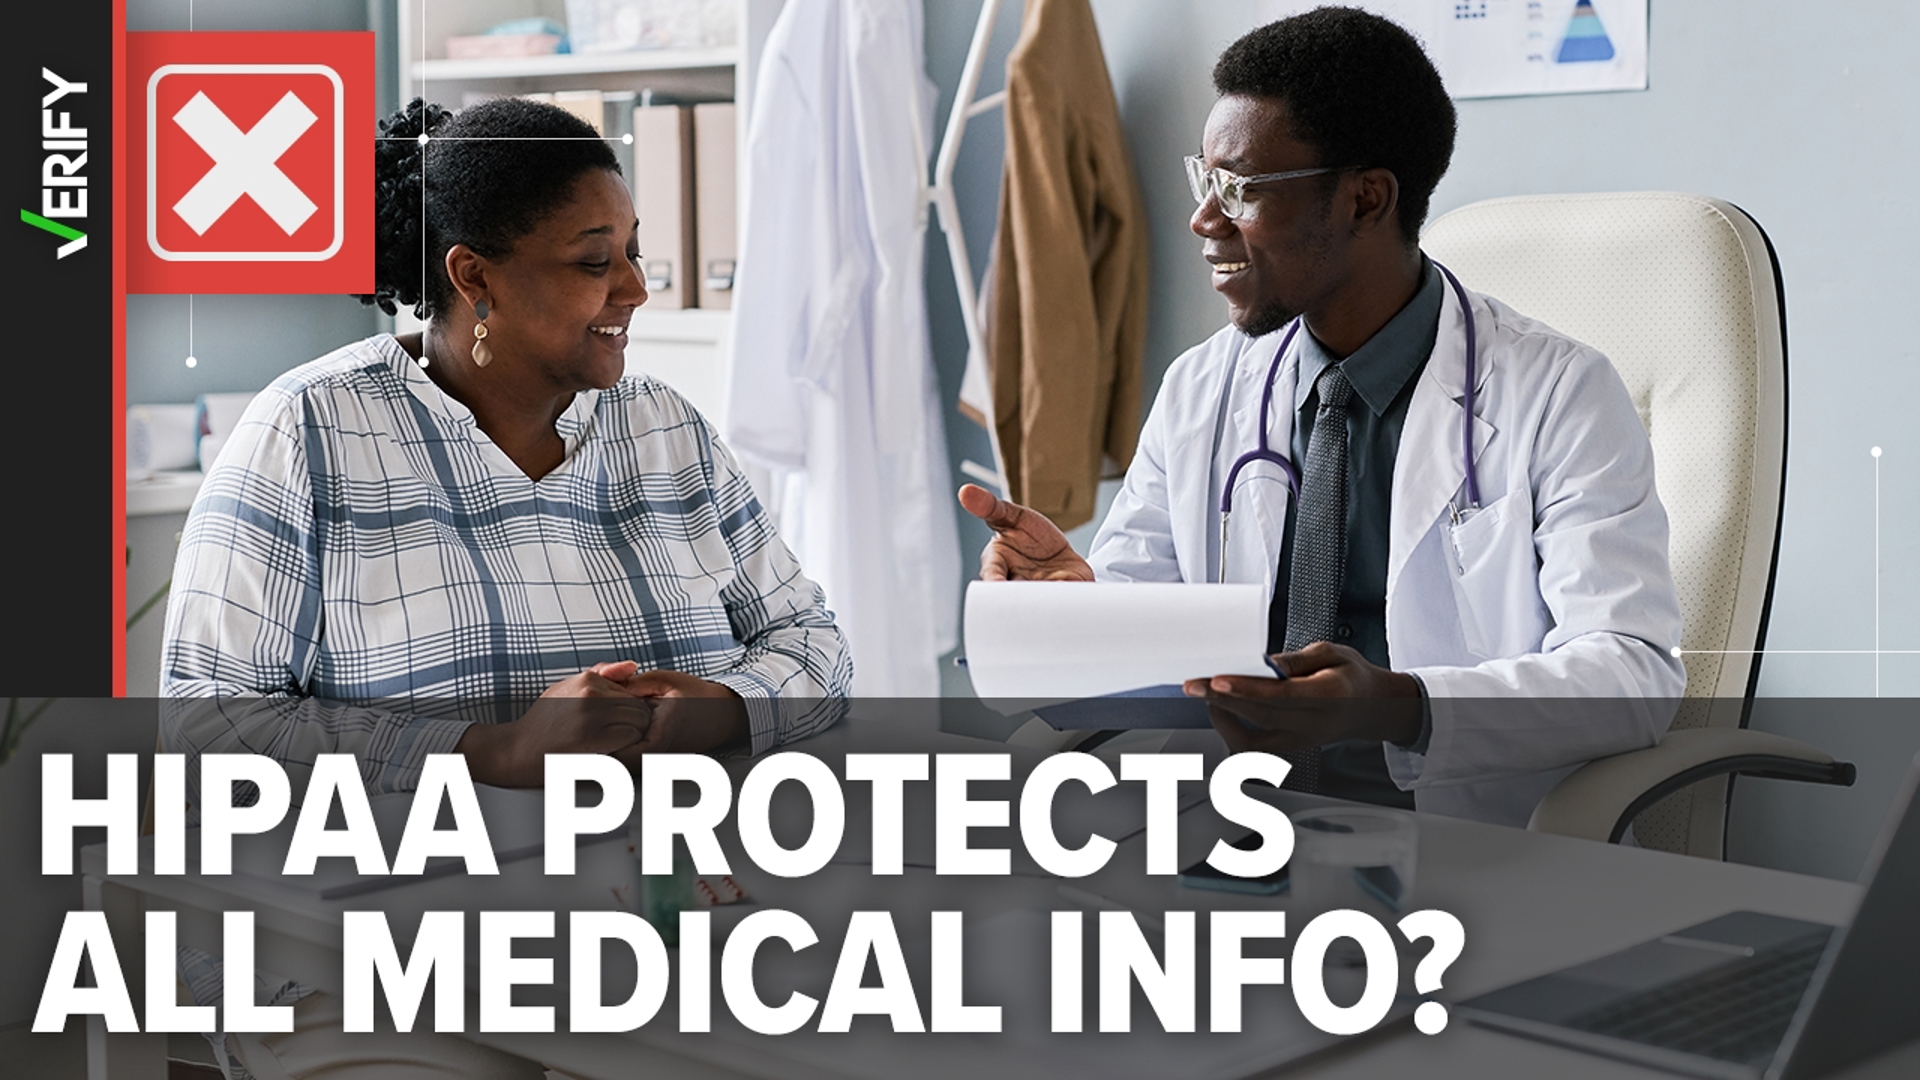 HIPAA is a federal law that restricts the release of medical information without a person’s consent, but it doesn’t protect all of your private medical information.